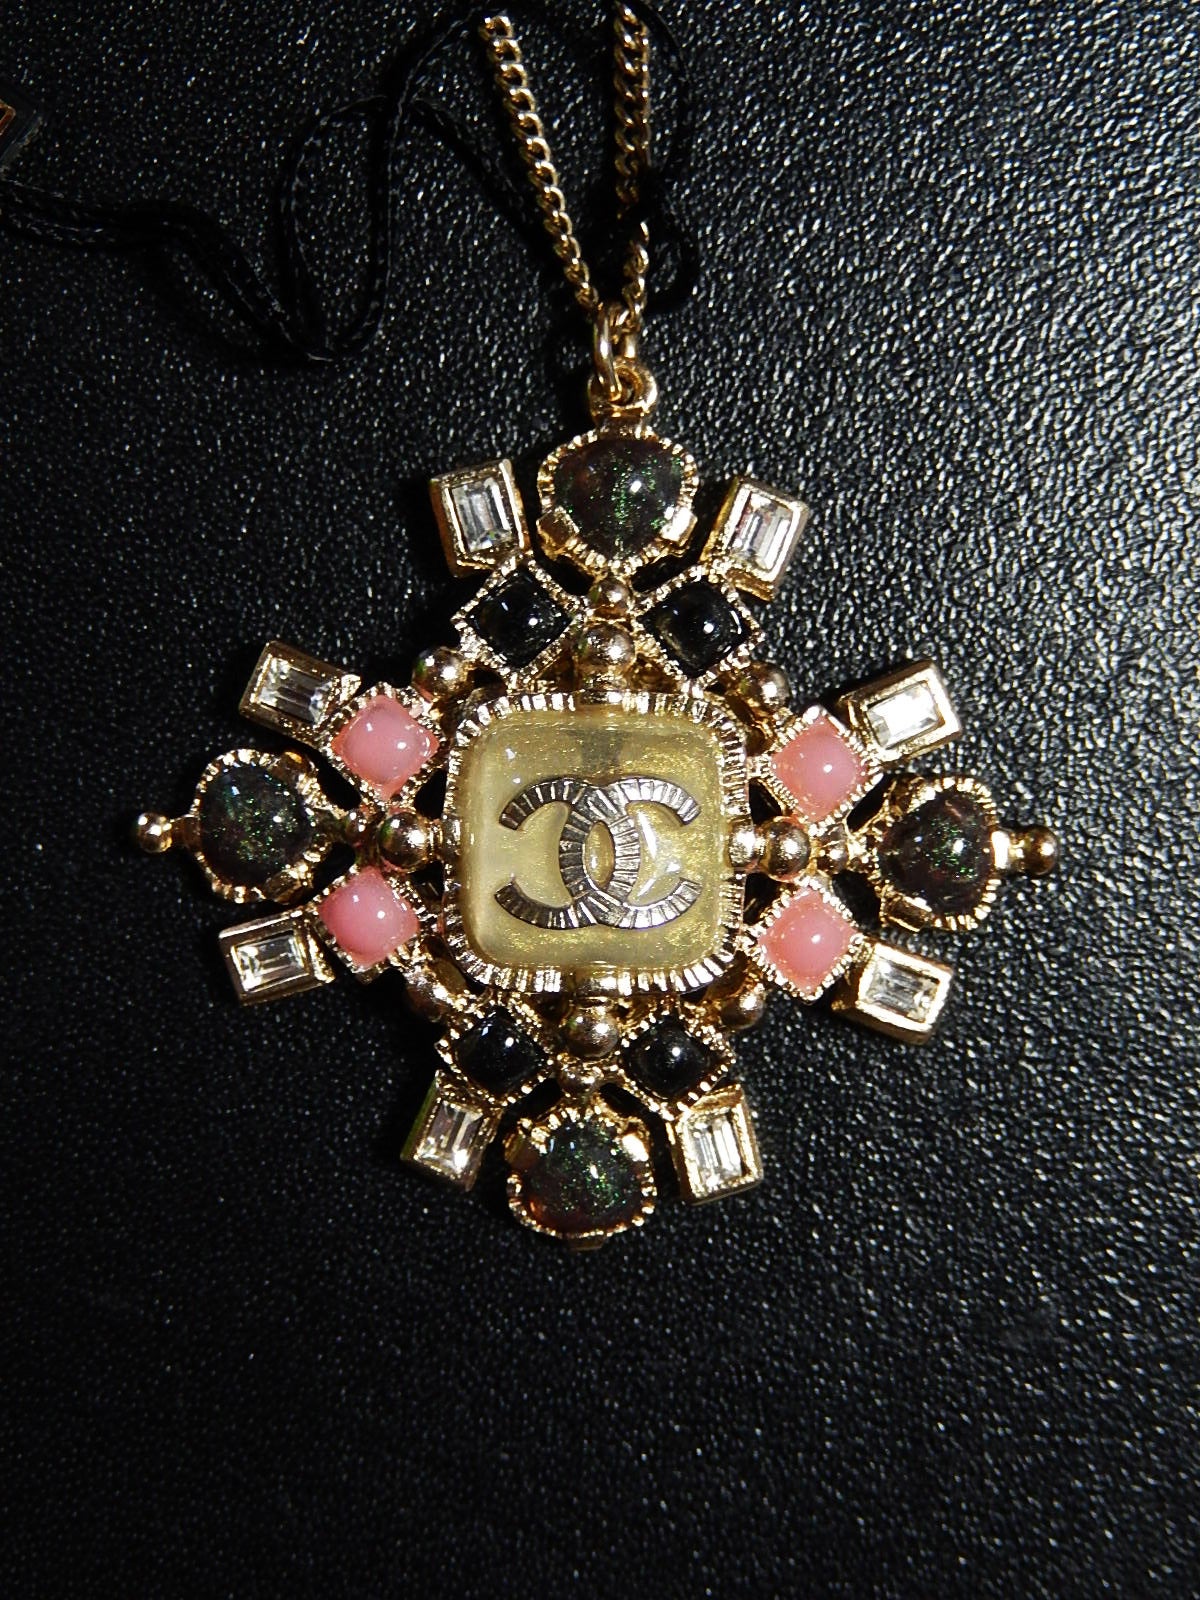 Chanel Gold Chain with pearl multi-stone pendant with middle CC
Measures 13.25